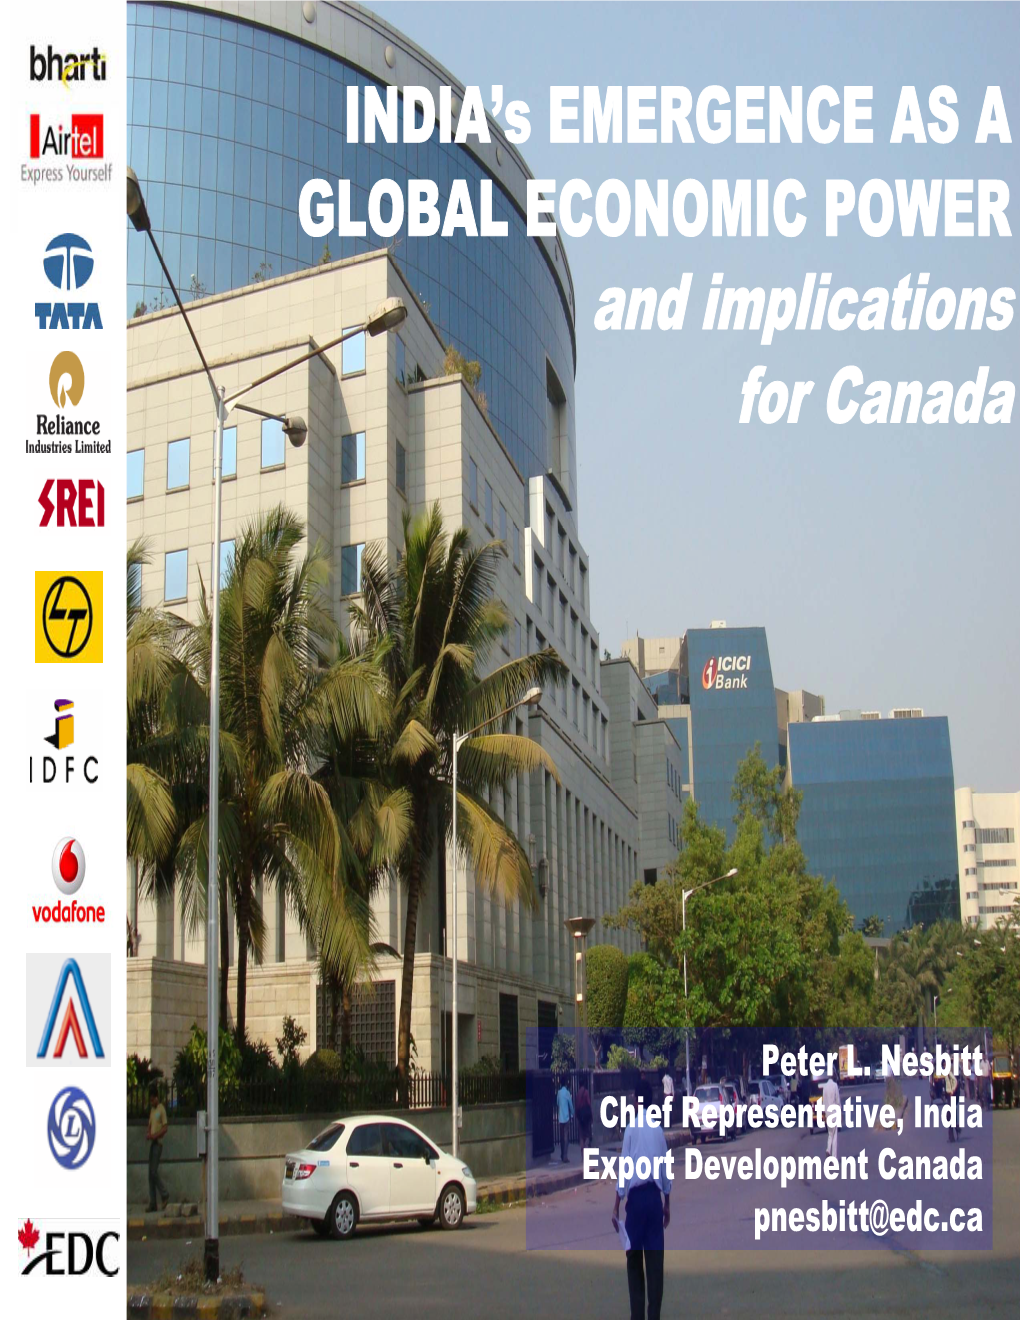 INDIA’S EMERGENCE AS a GLOBAL ECONOMIC POWER and Implications for Canada